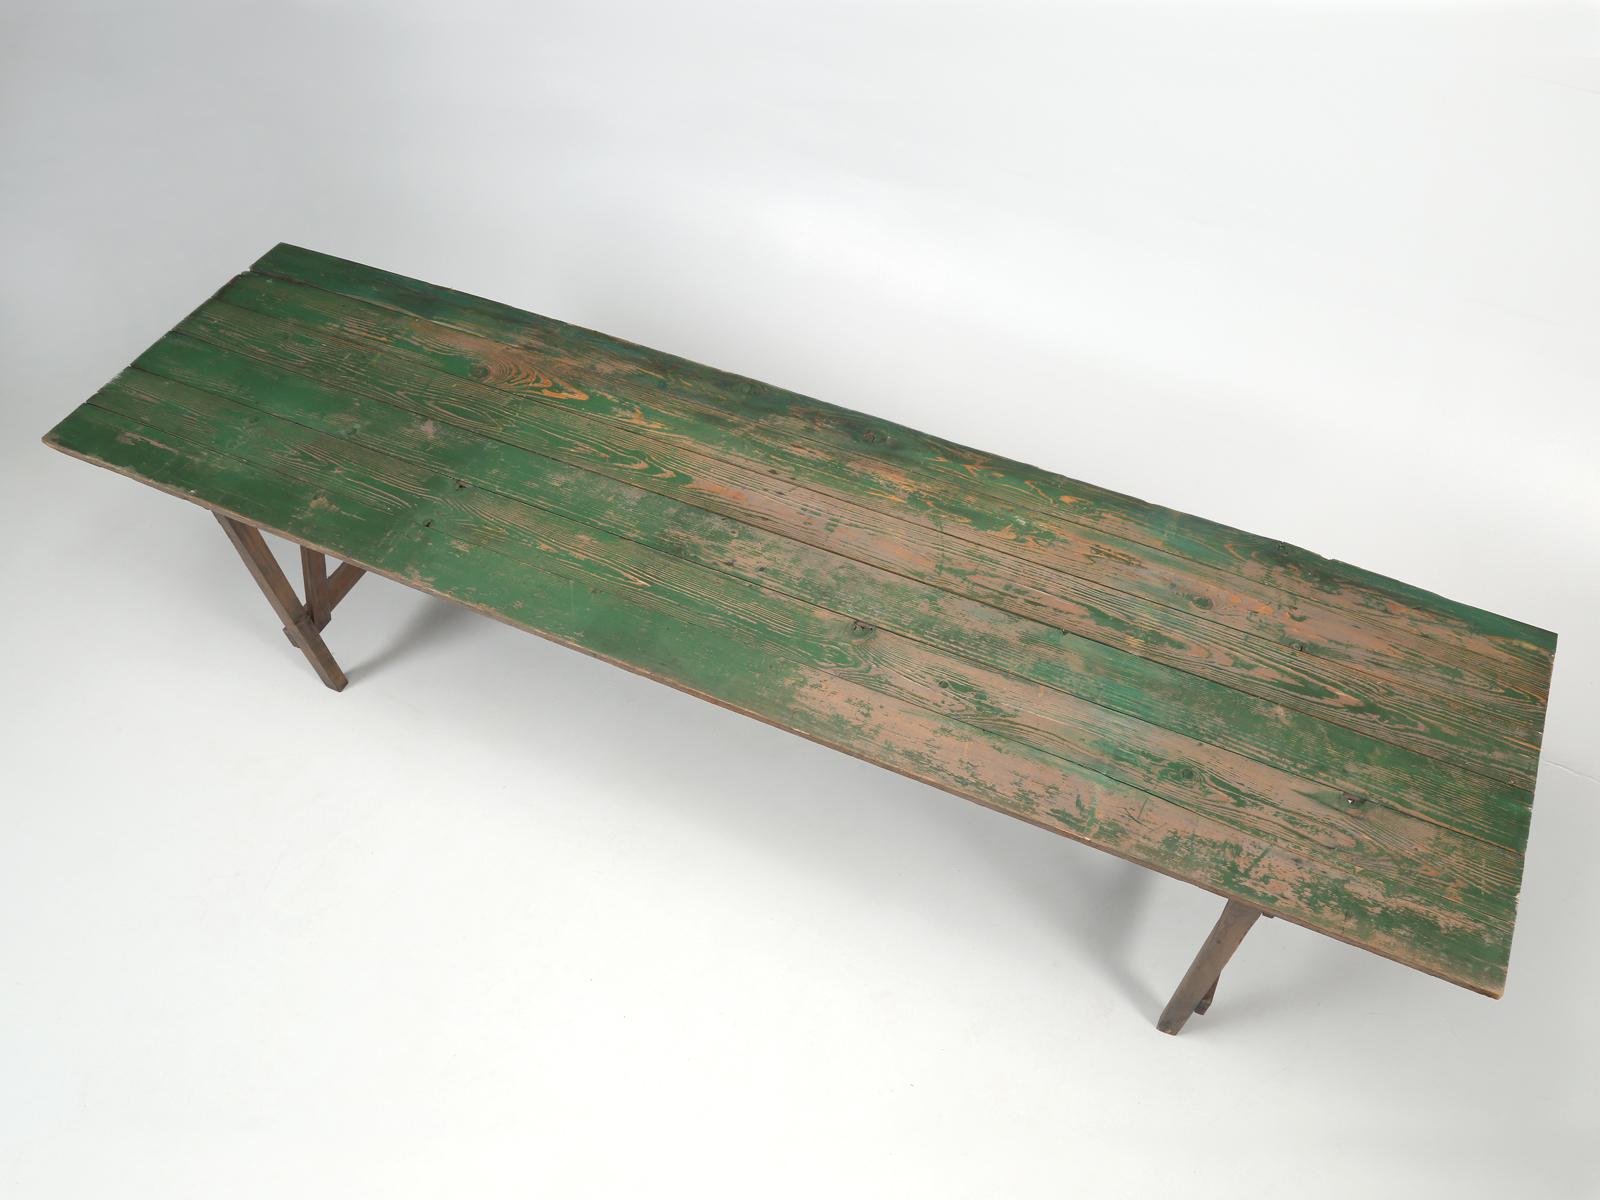 American Rustic Northern Wisconsin Farm Table, Original Paint Long and It Folds Flat